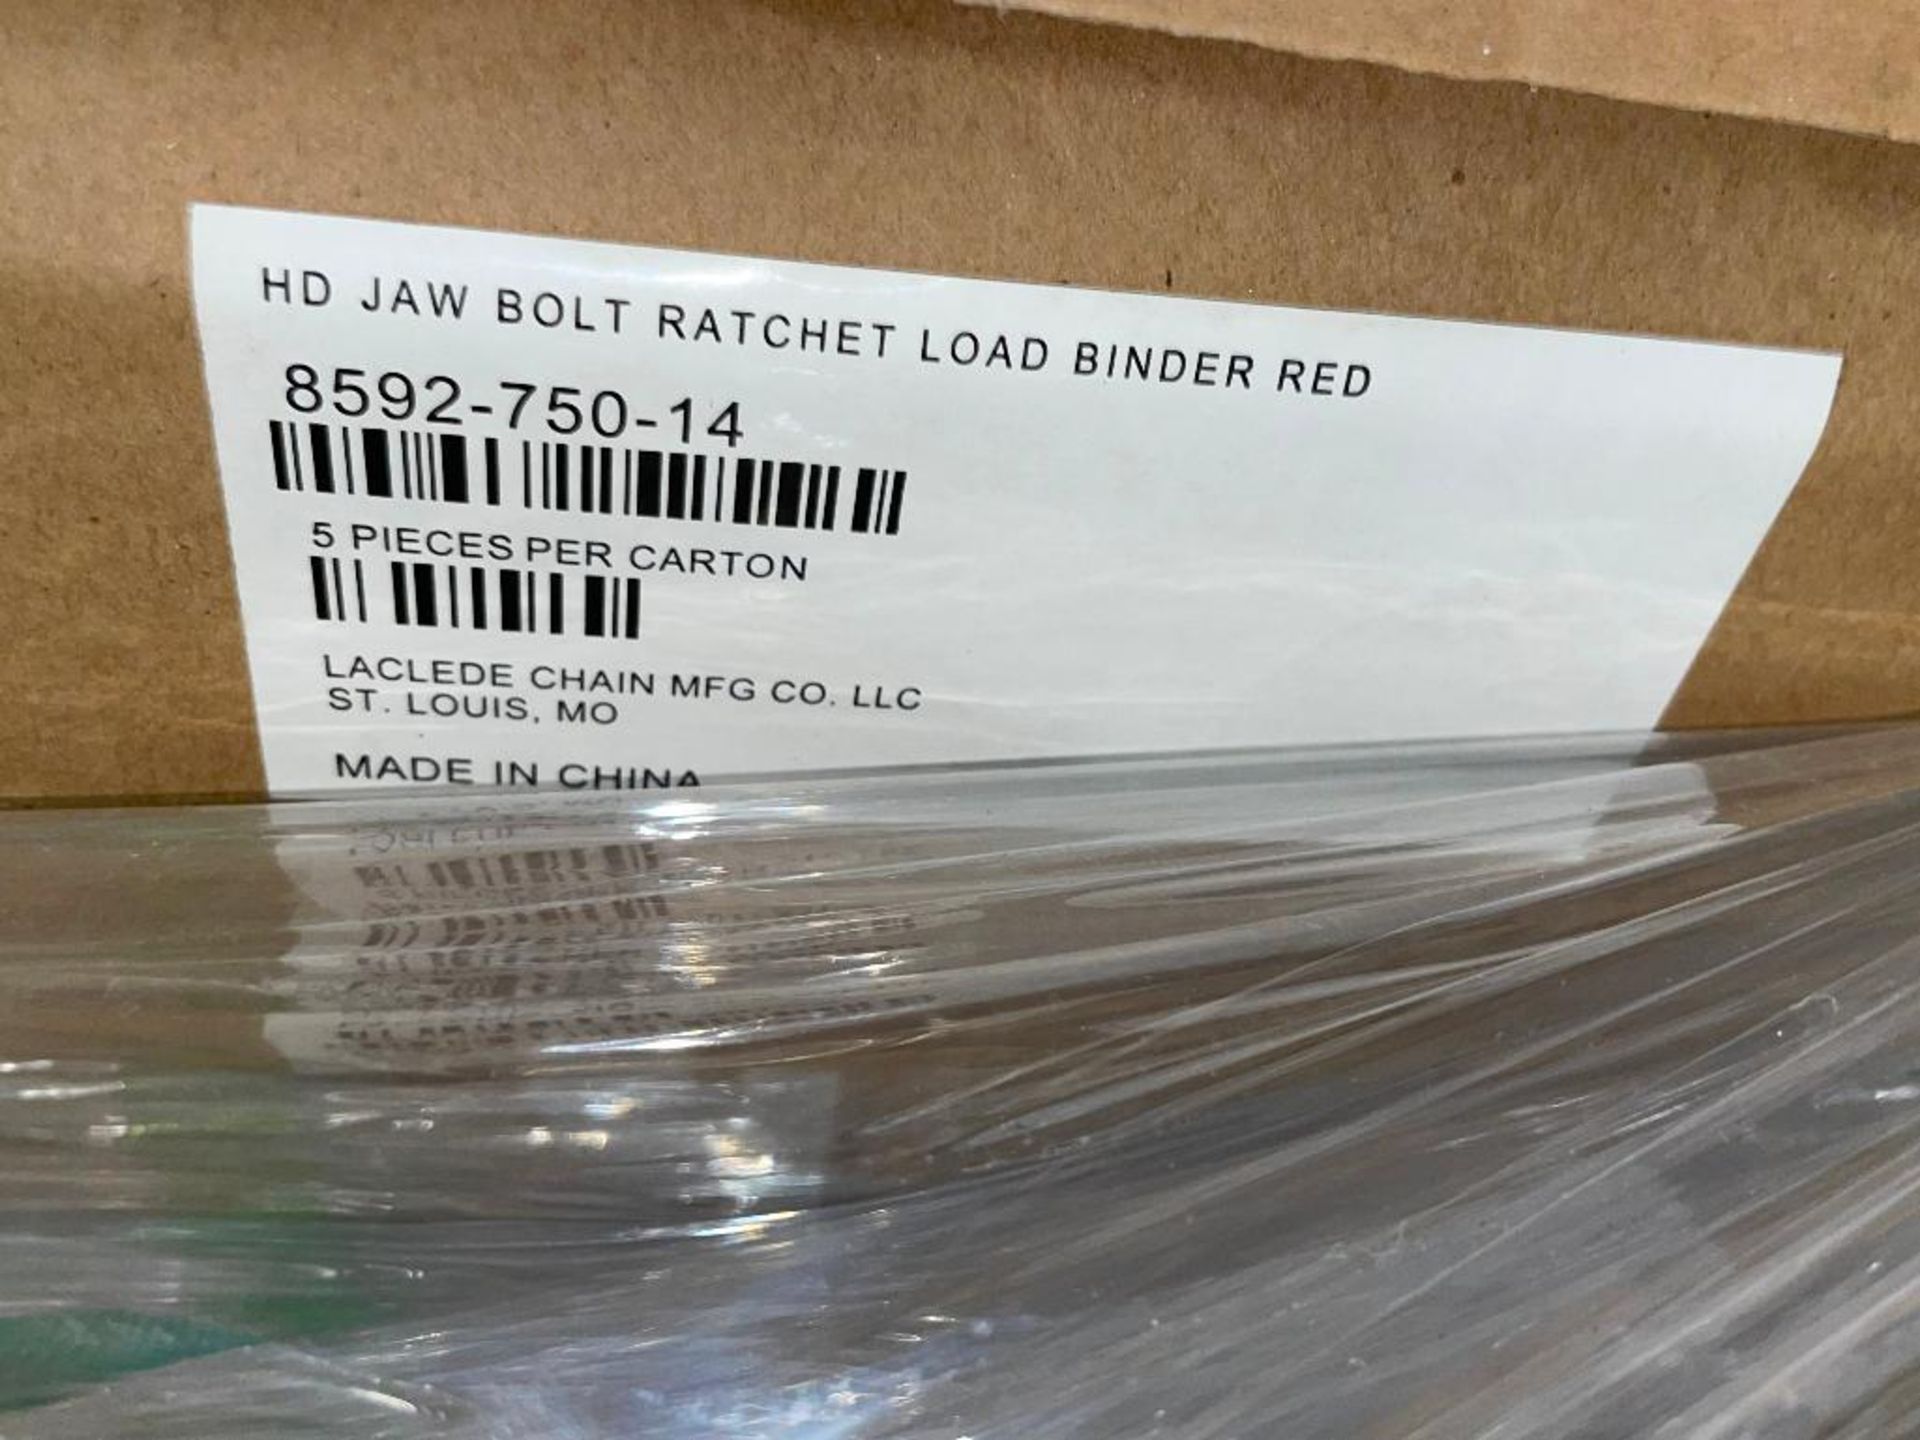 DESCRIPTION: (2) CASES OF HD JAW BOLT RATCHET LOAD BINDERS - RED. 5 PER CASE, 10 IN LOT TOTAL. BRAND - Image 5 of 6